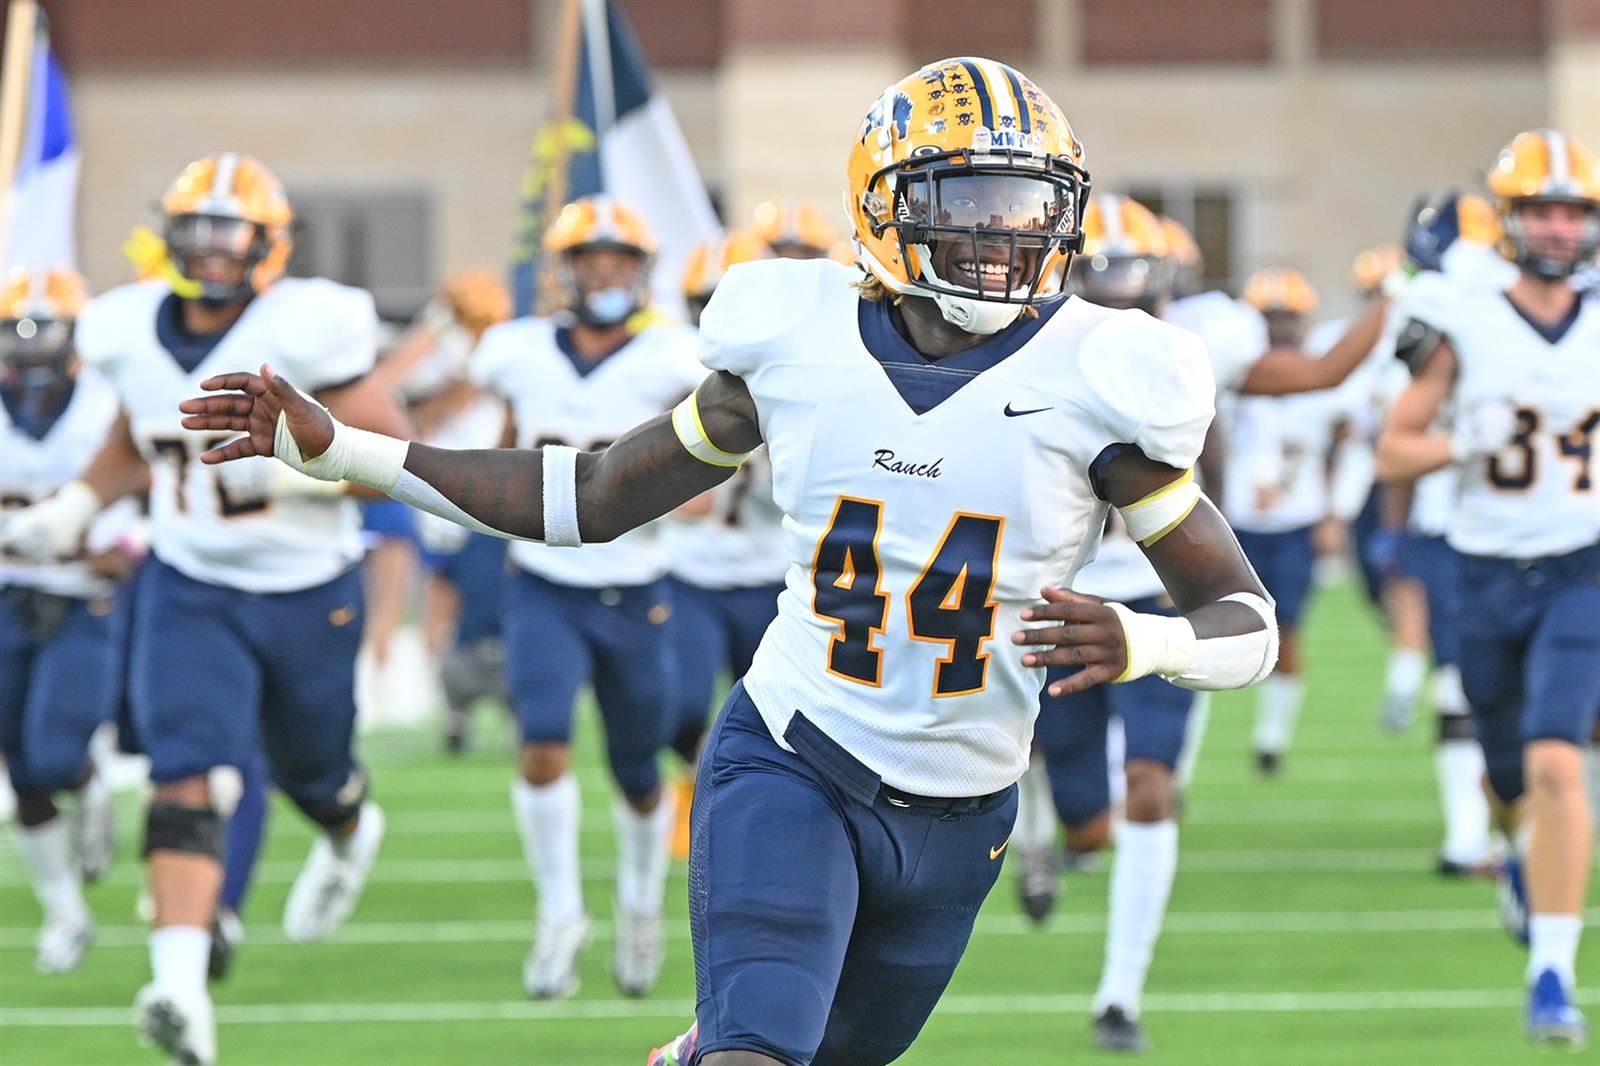 Cypress Ranch High School senior linebacker Christian Brathwaite and the Mustangs earned a share of the 16-6A title.